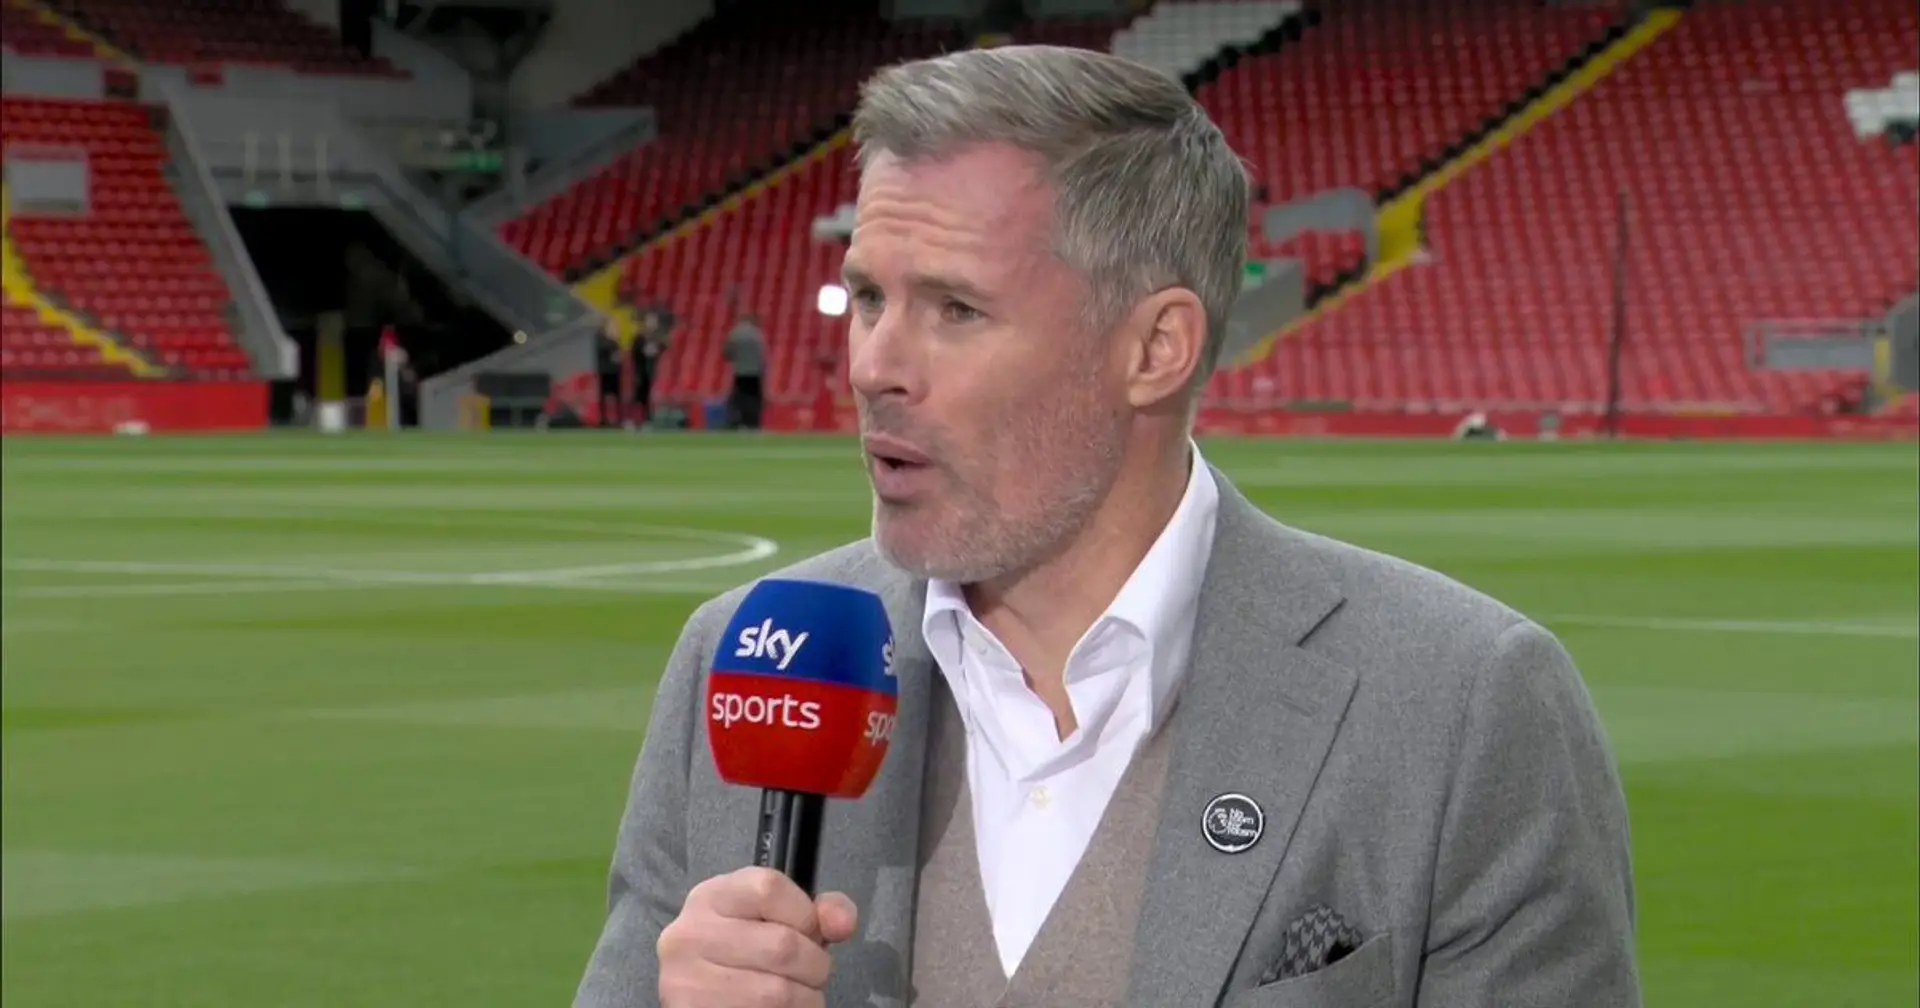 'Awful': Carragher slams one Liverpool player after Forest defeat, wants another player back 'ASAP'